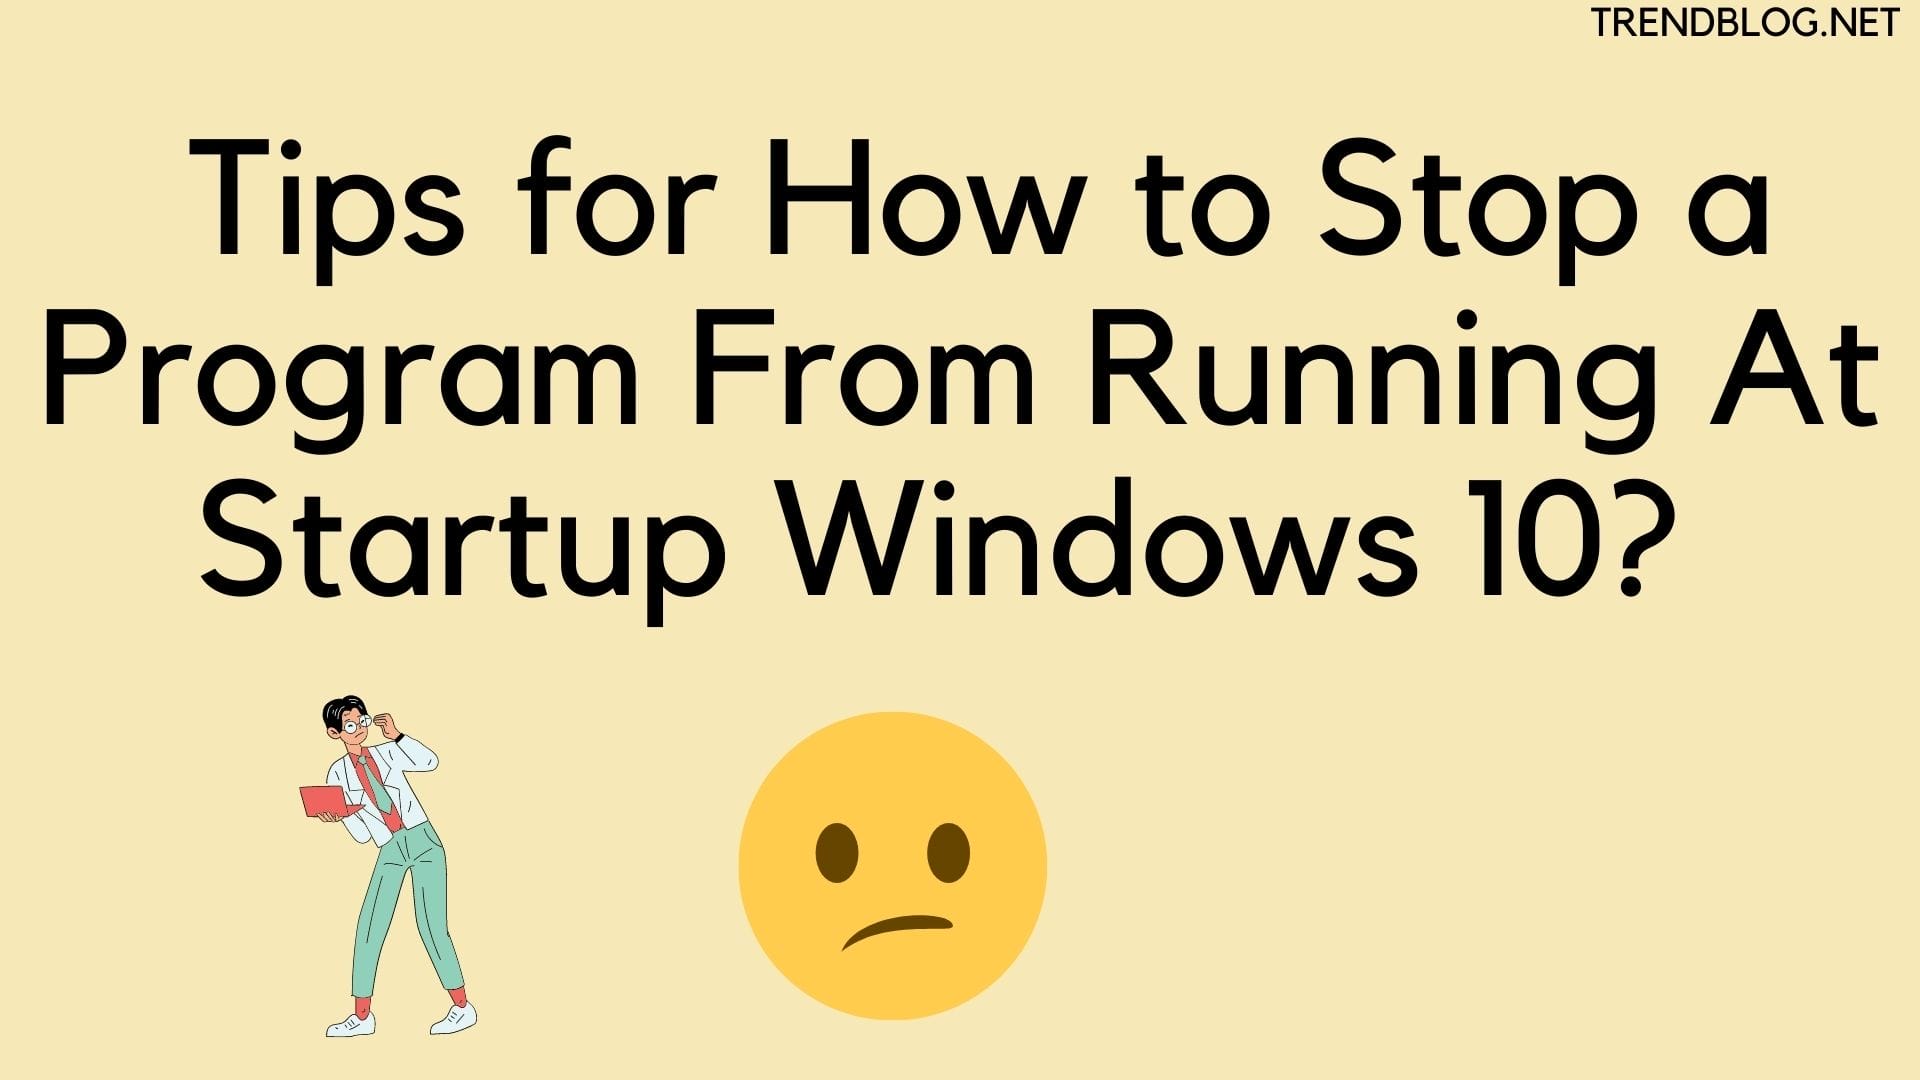 Other Tips for How to Stop a Program From Running At Startup Windows 10? 